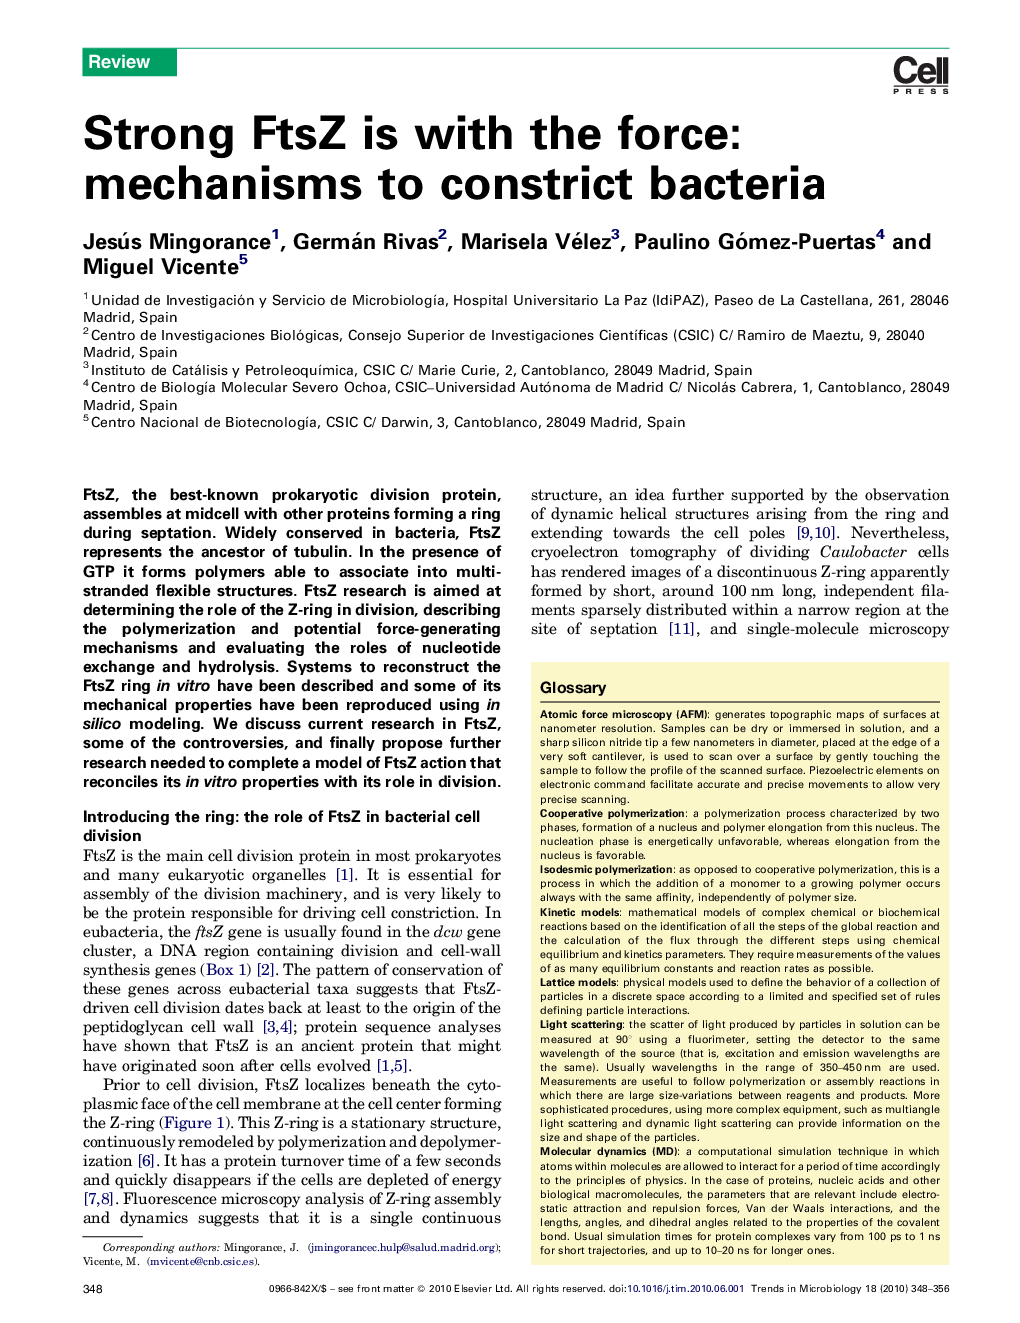 Strong FtsZ is with the force: mechanisms to constrict bacteria